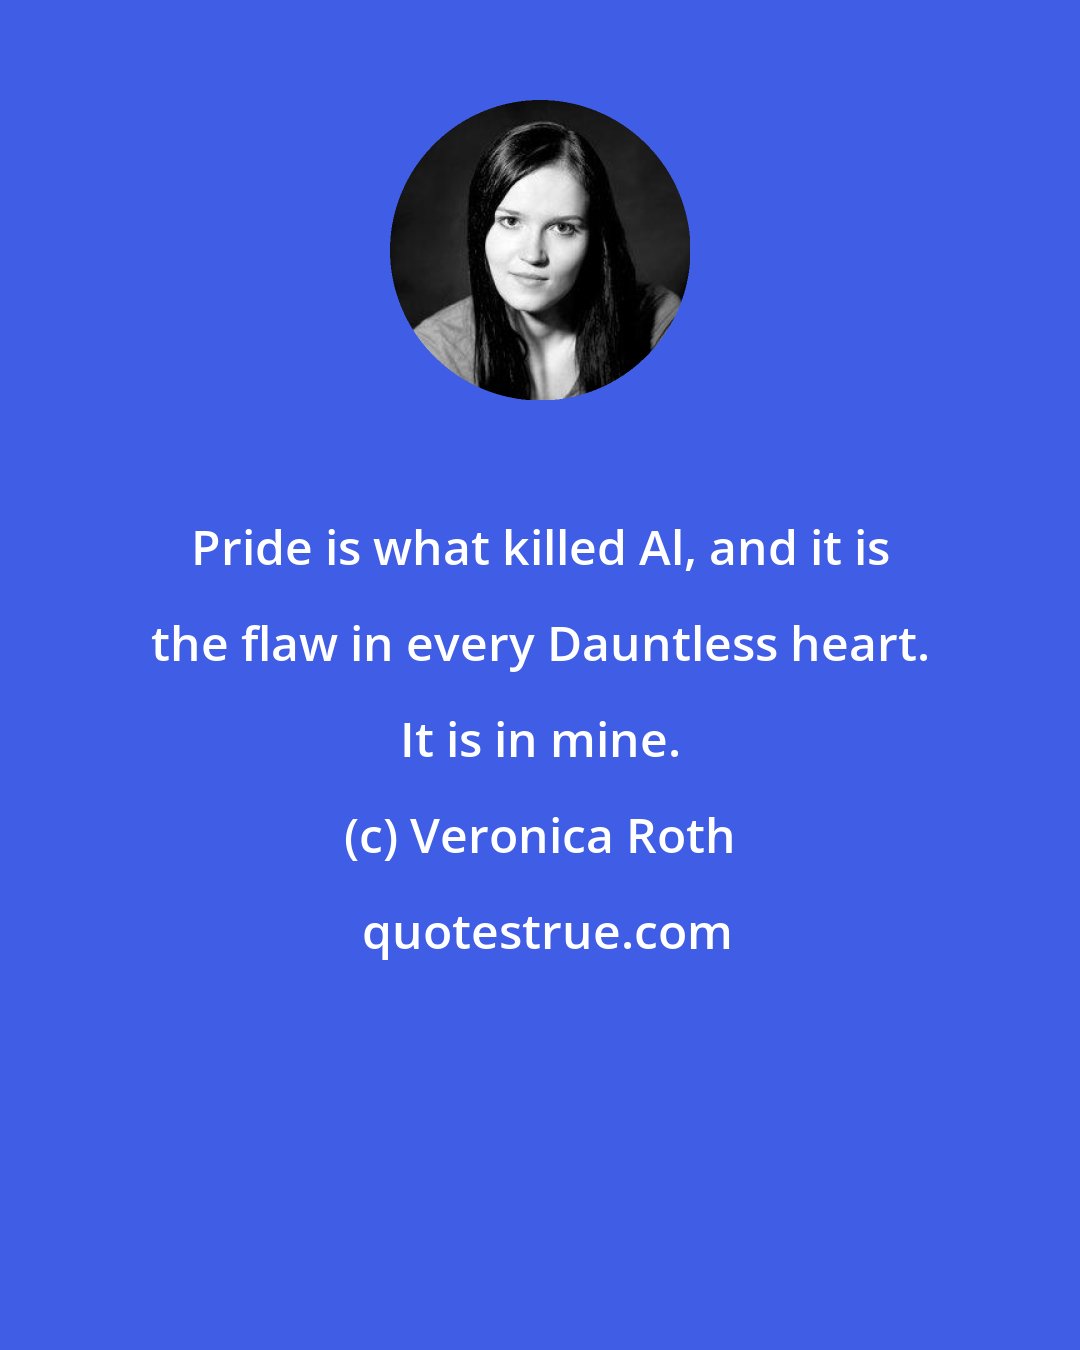 Veronica Roth: Pride is what killed Al, and it is the flaw in every Dauntless heart. It is in mine.